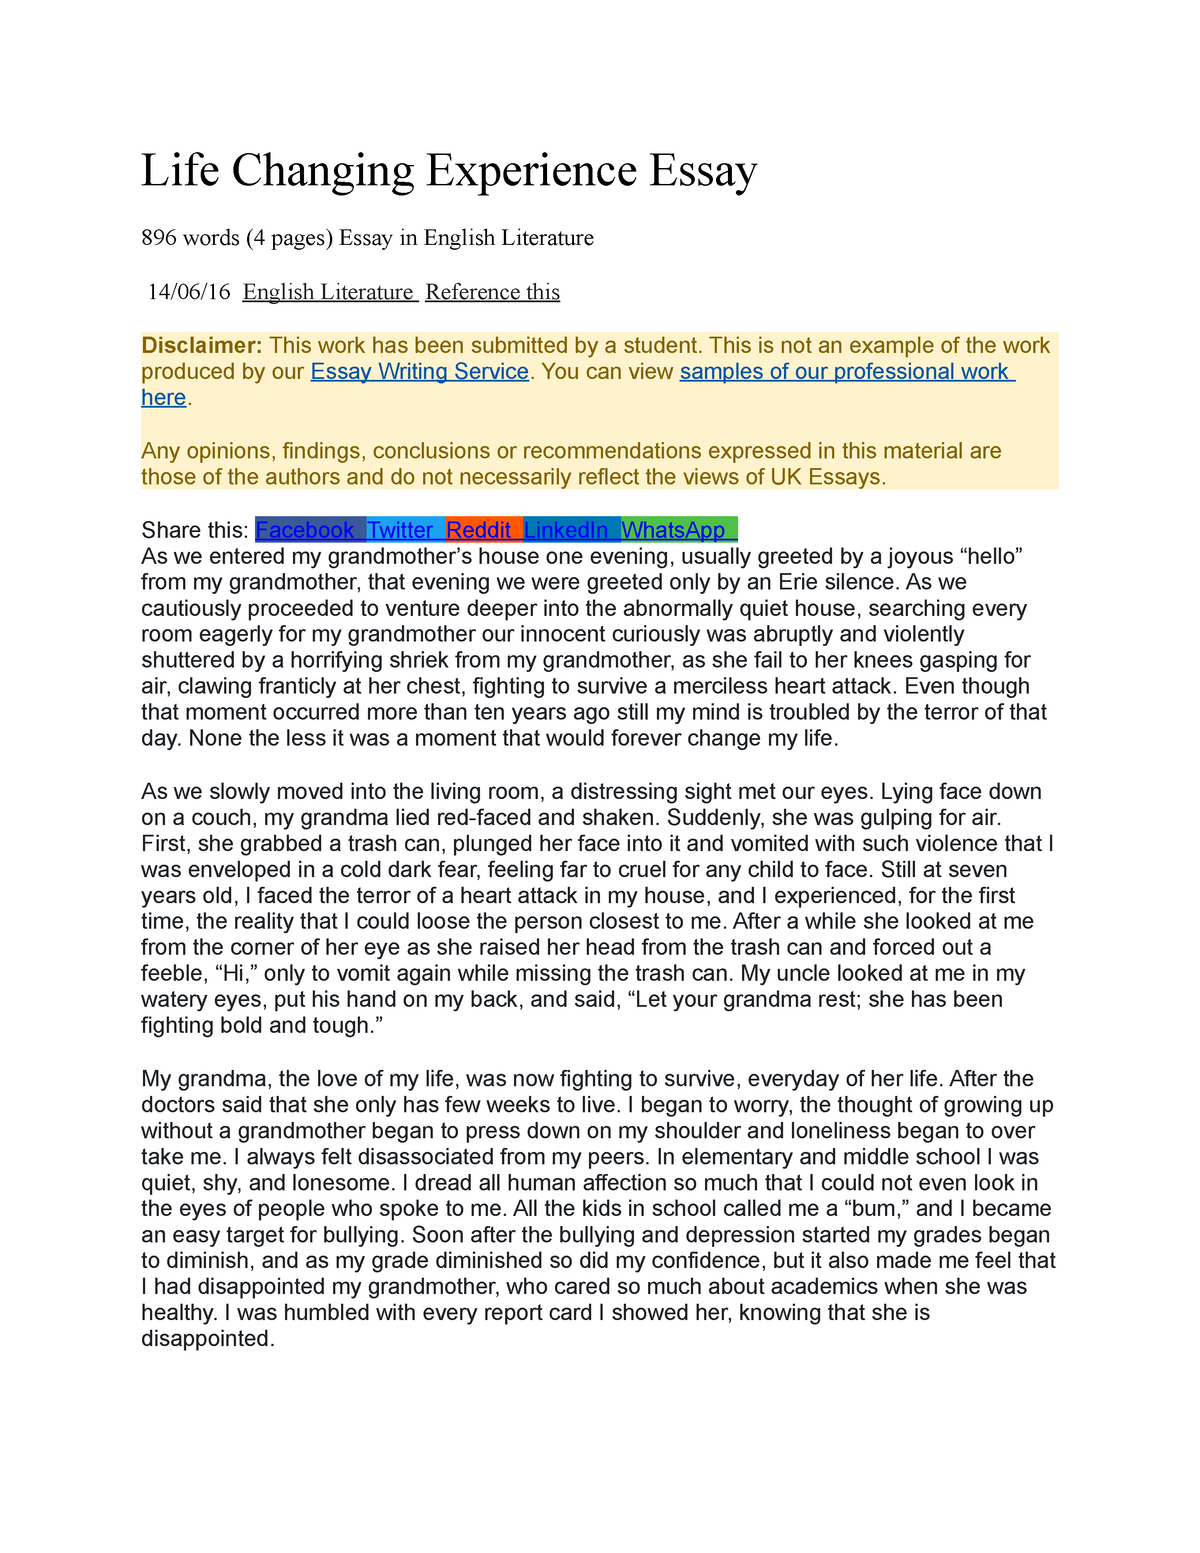 life changing experience essay 400 words